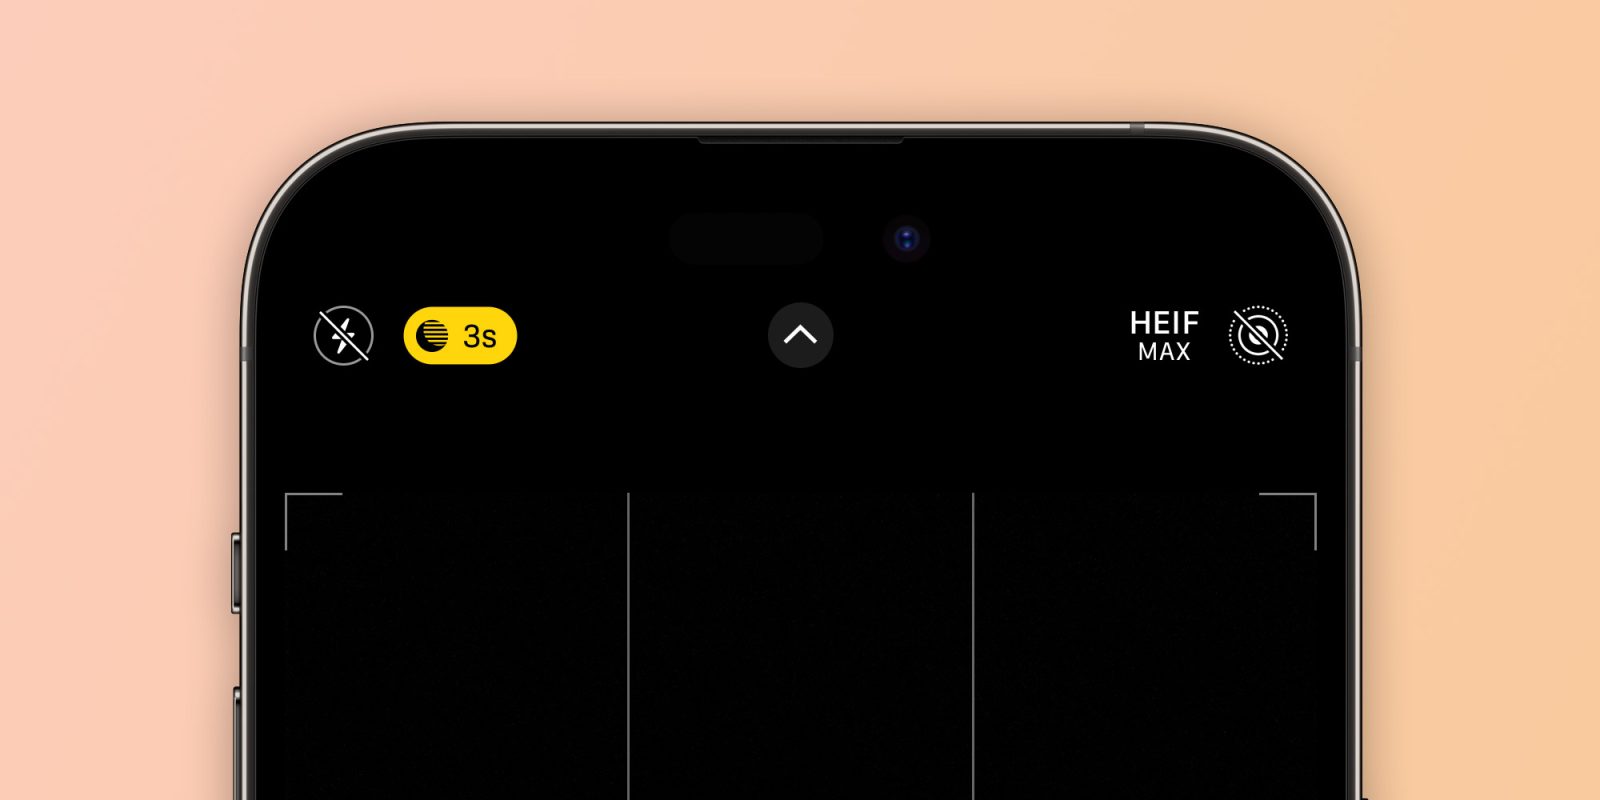 iPhone 14 Pro will also get 'HEIF Max' option to take 48MP photos in the Camera app